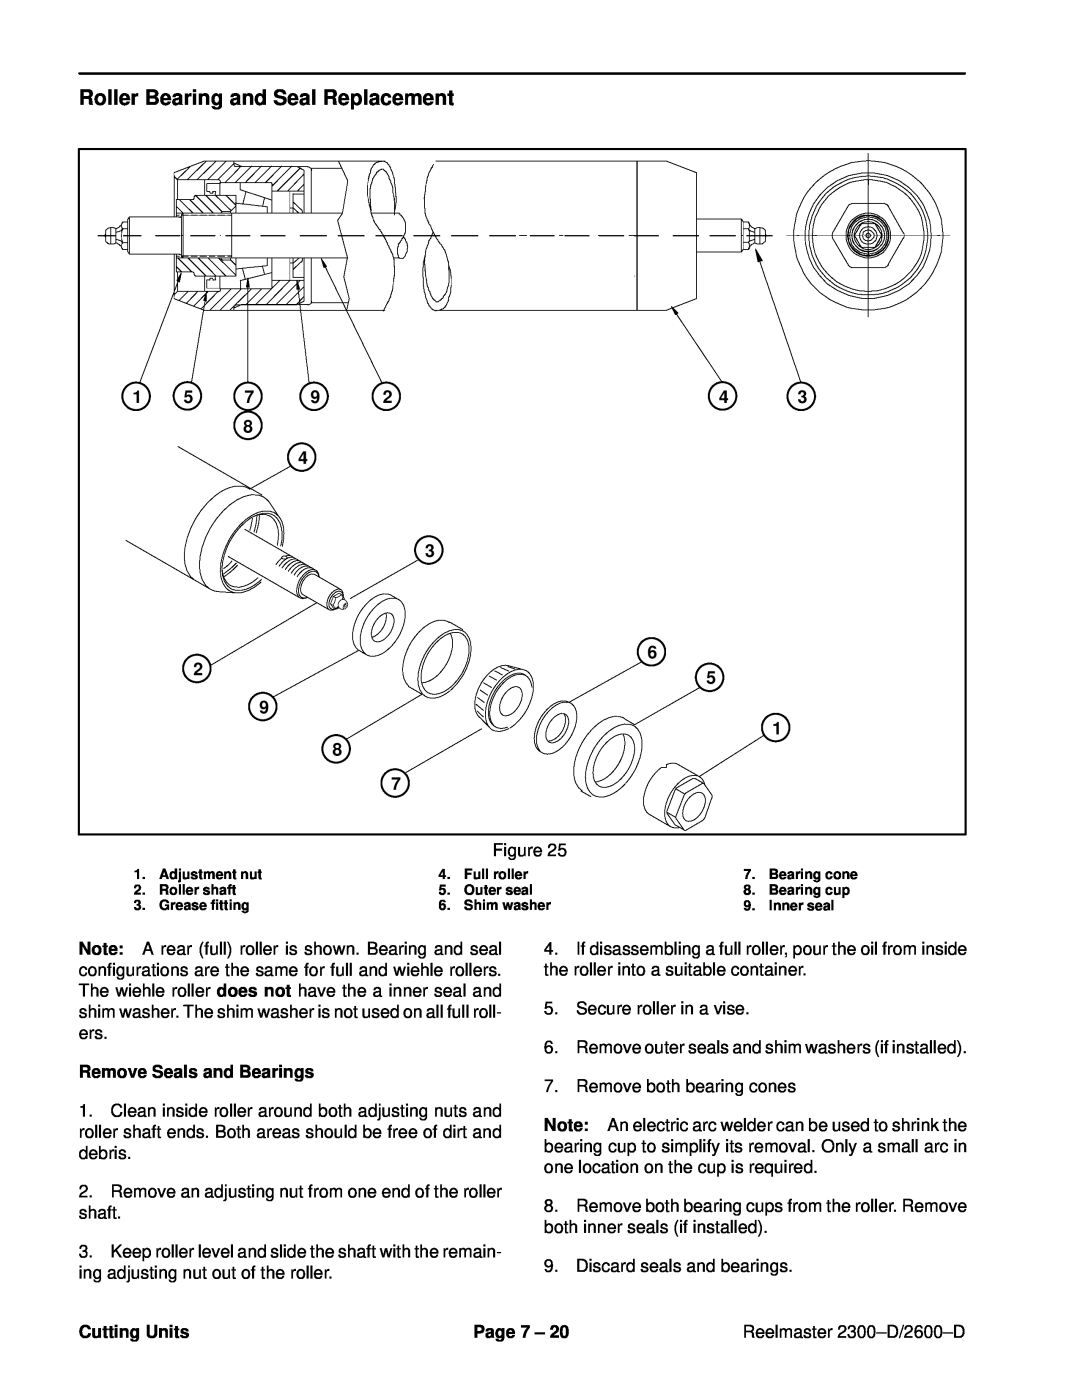 Toro 2300-D, 2600D service manual Roller Bearing and Seal Replacement, Remove Seals and Bearings, Cutting Units, Page 7 ± 